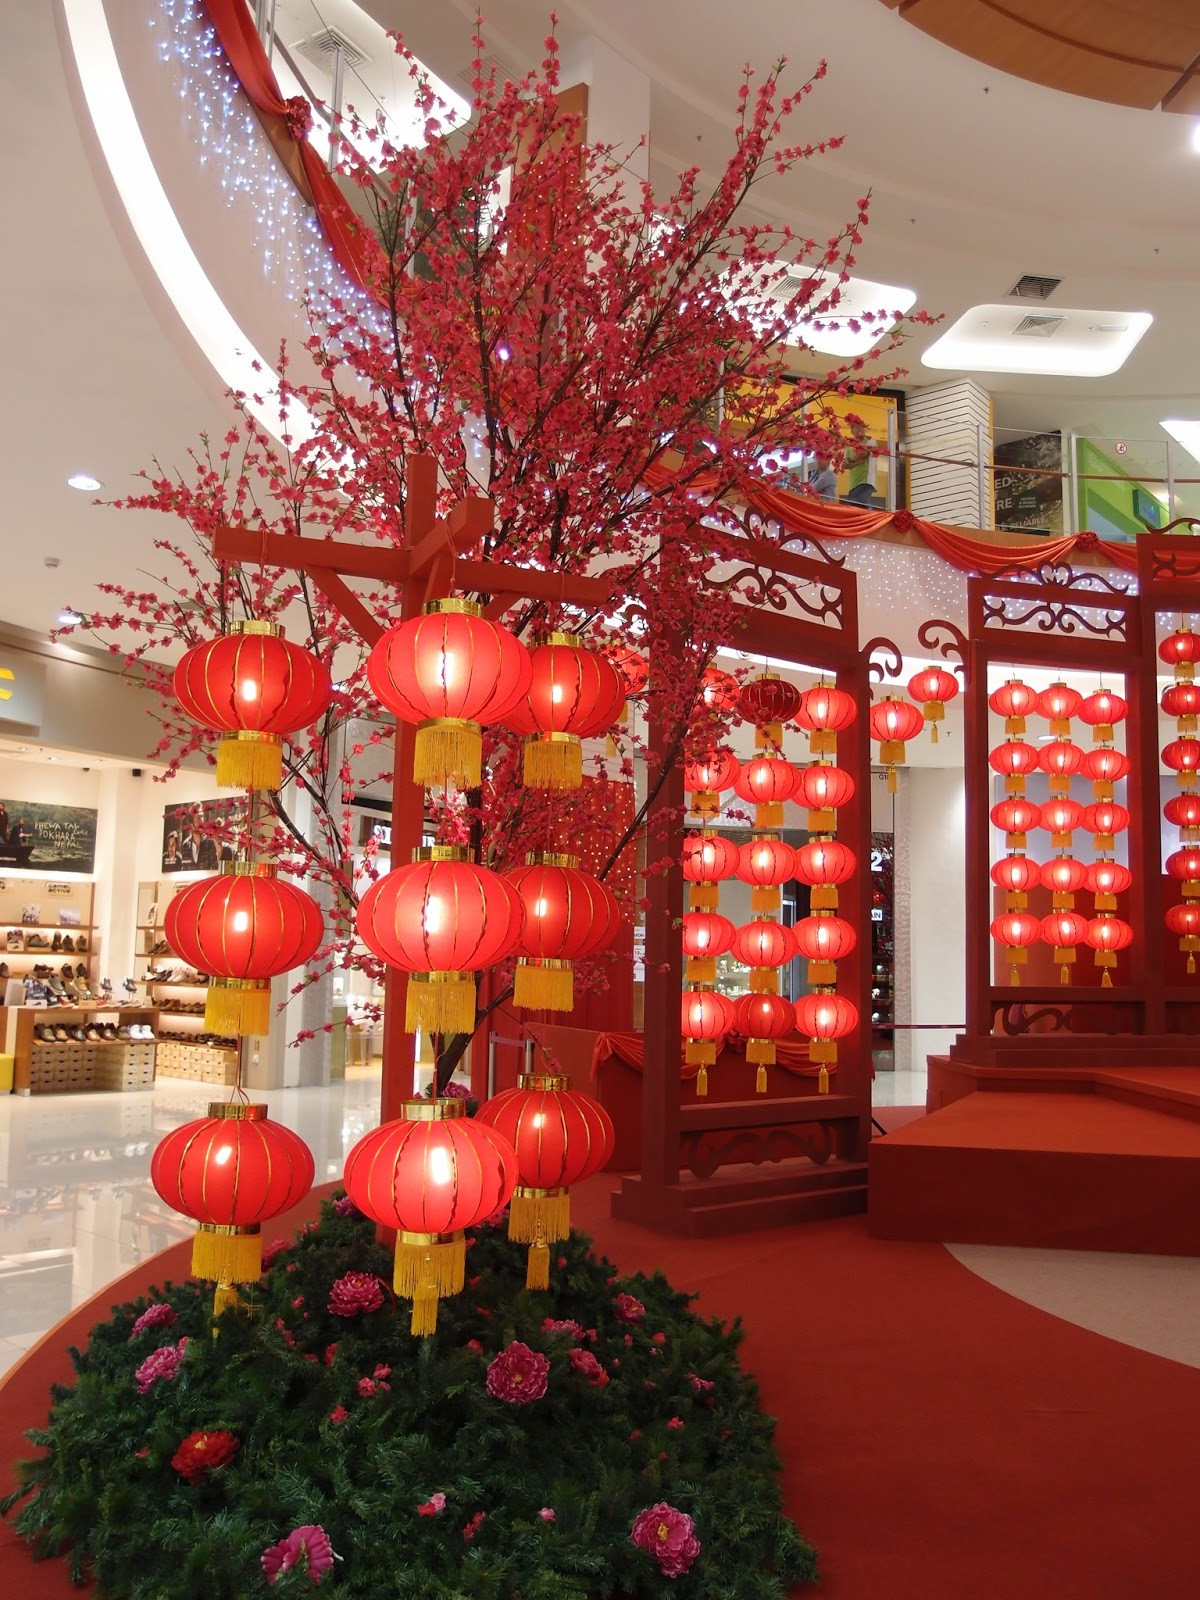 Chinese New Year Decor Ideas
 Xing Fu CHINESE NEW YEAR DECORATIONS AT AEON SITIAWAN